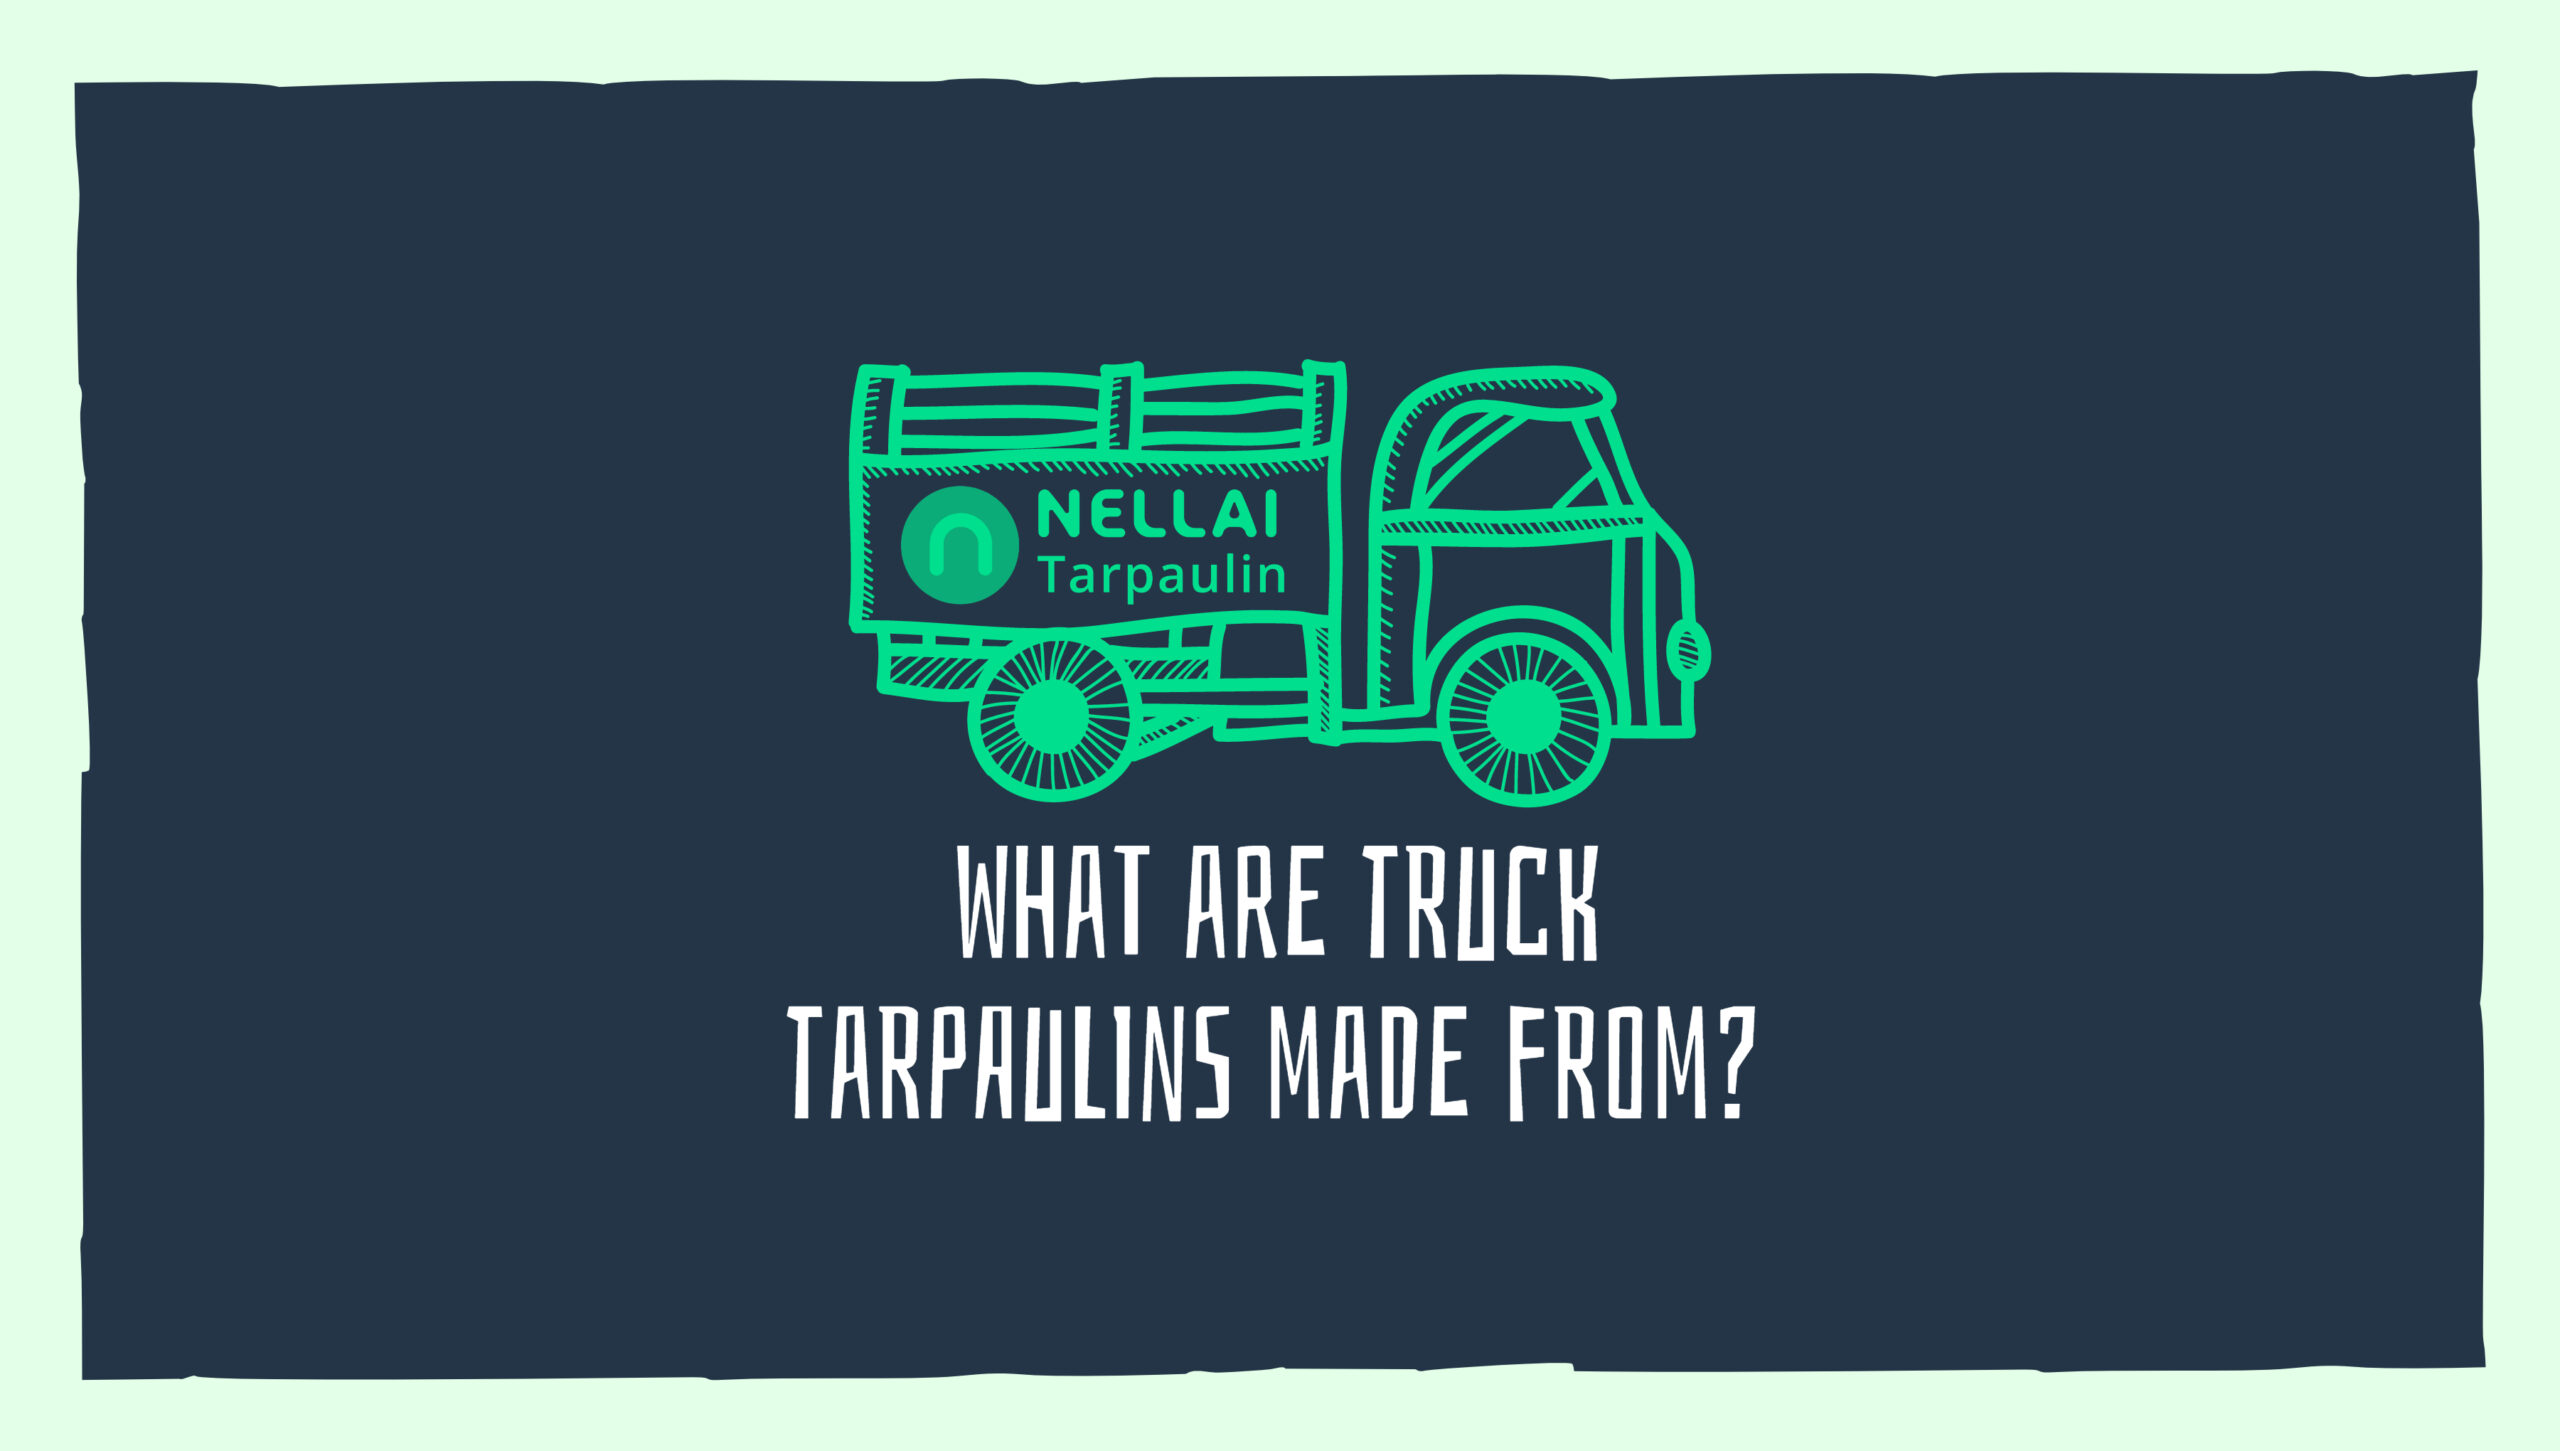 What are truck tarpaulins made from?